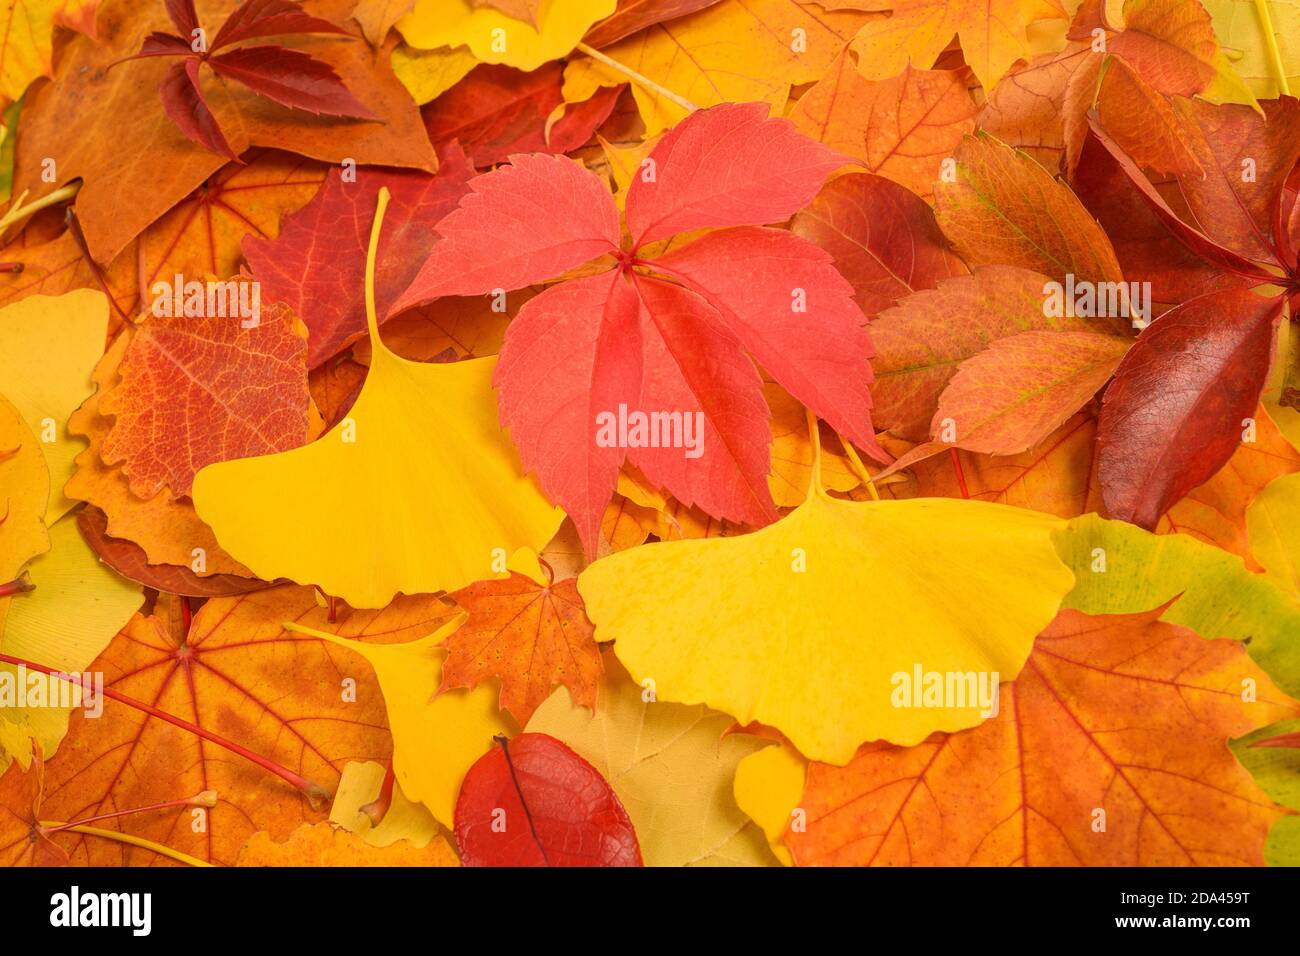 Dried leaves background, leaves falling in autumn Stock Photo